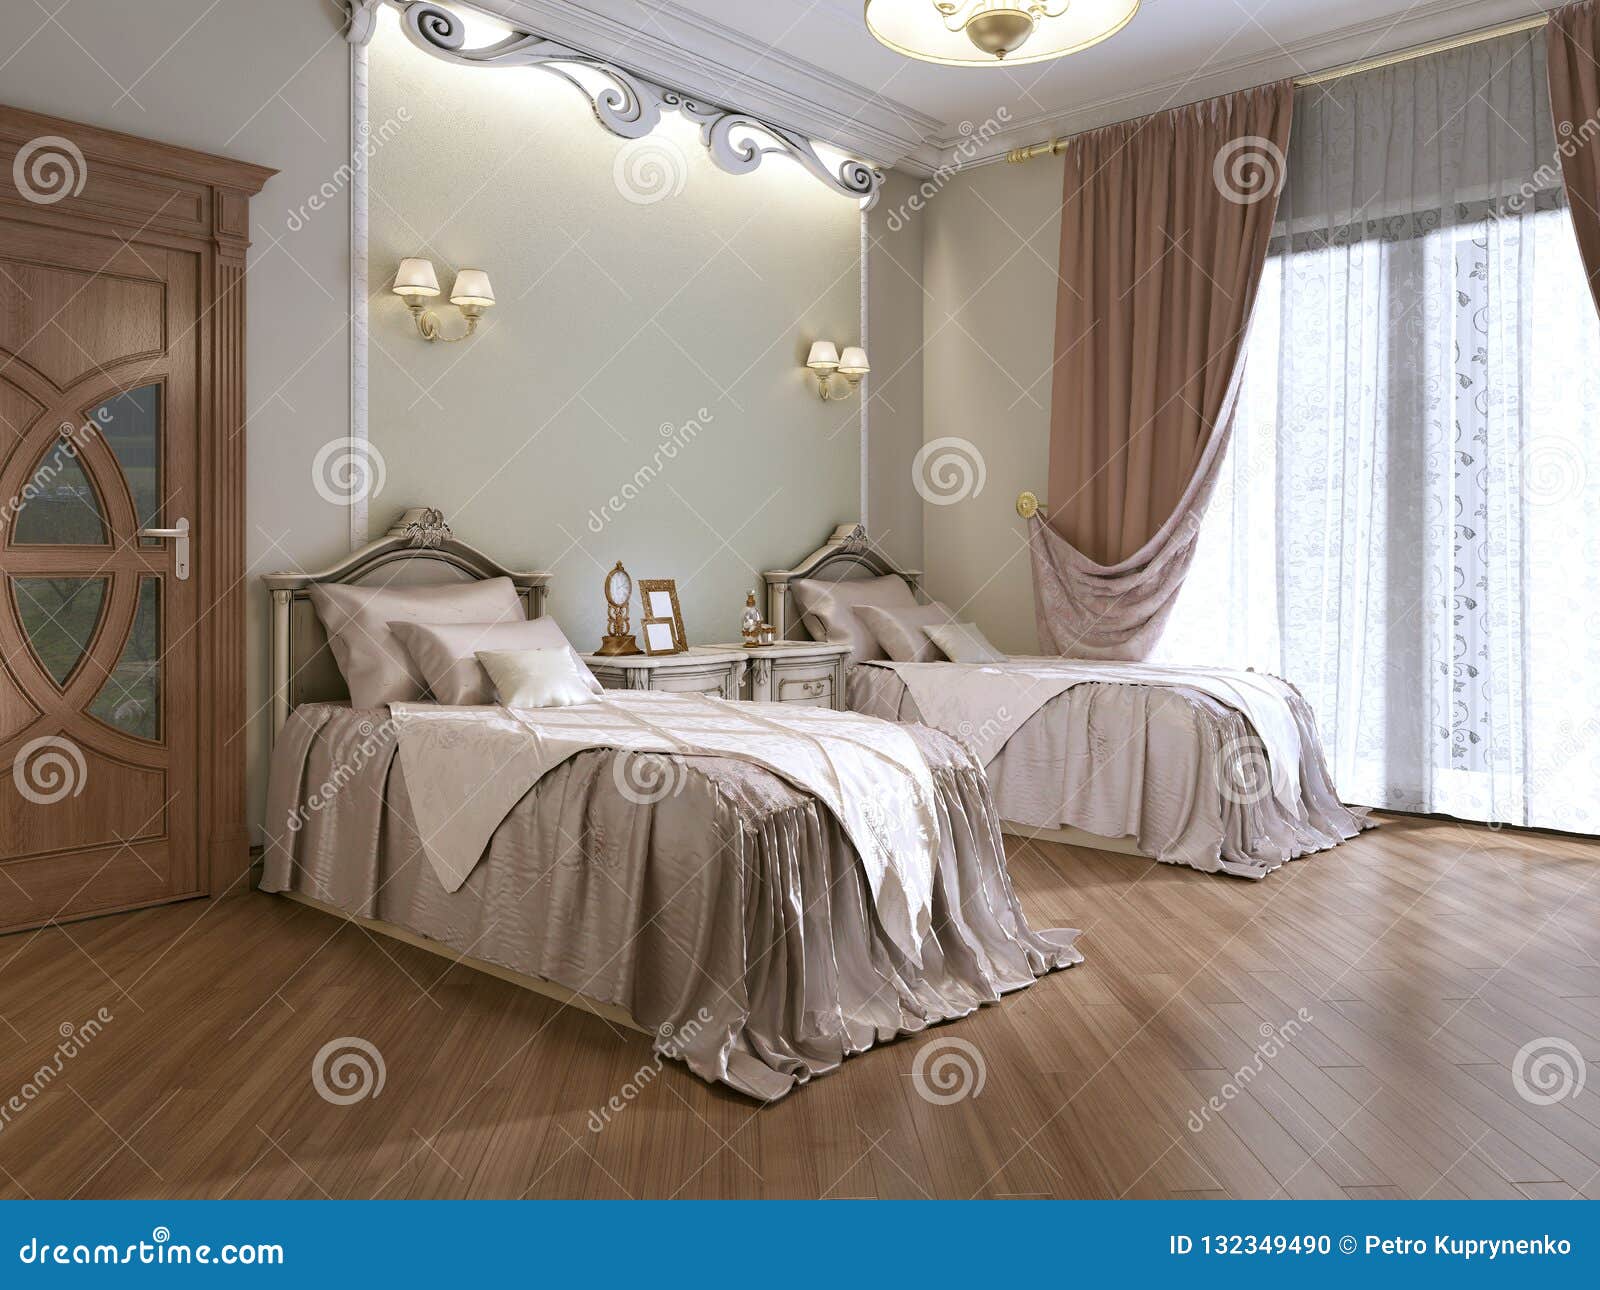 Luxurious Bedroom With Two Single Beds In A Classic Style